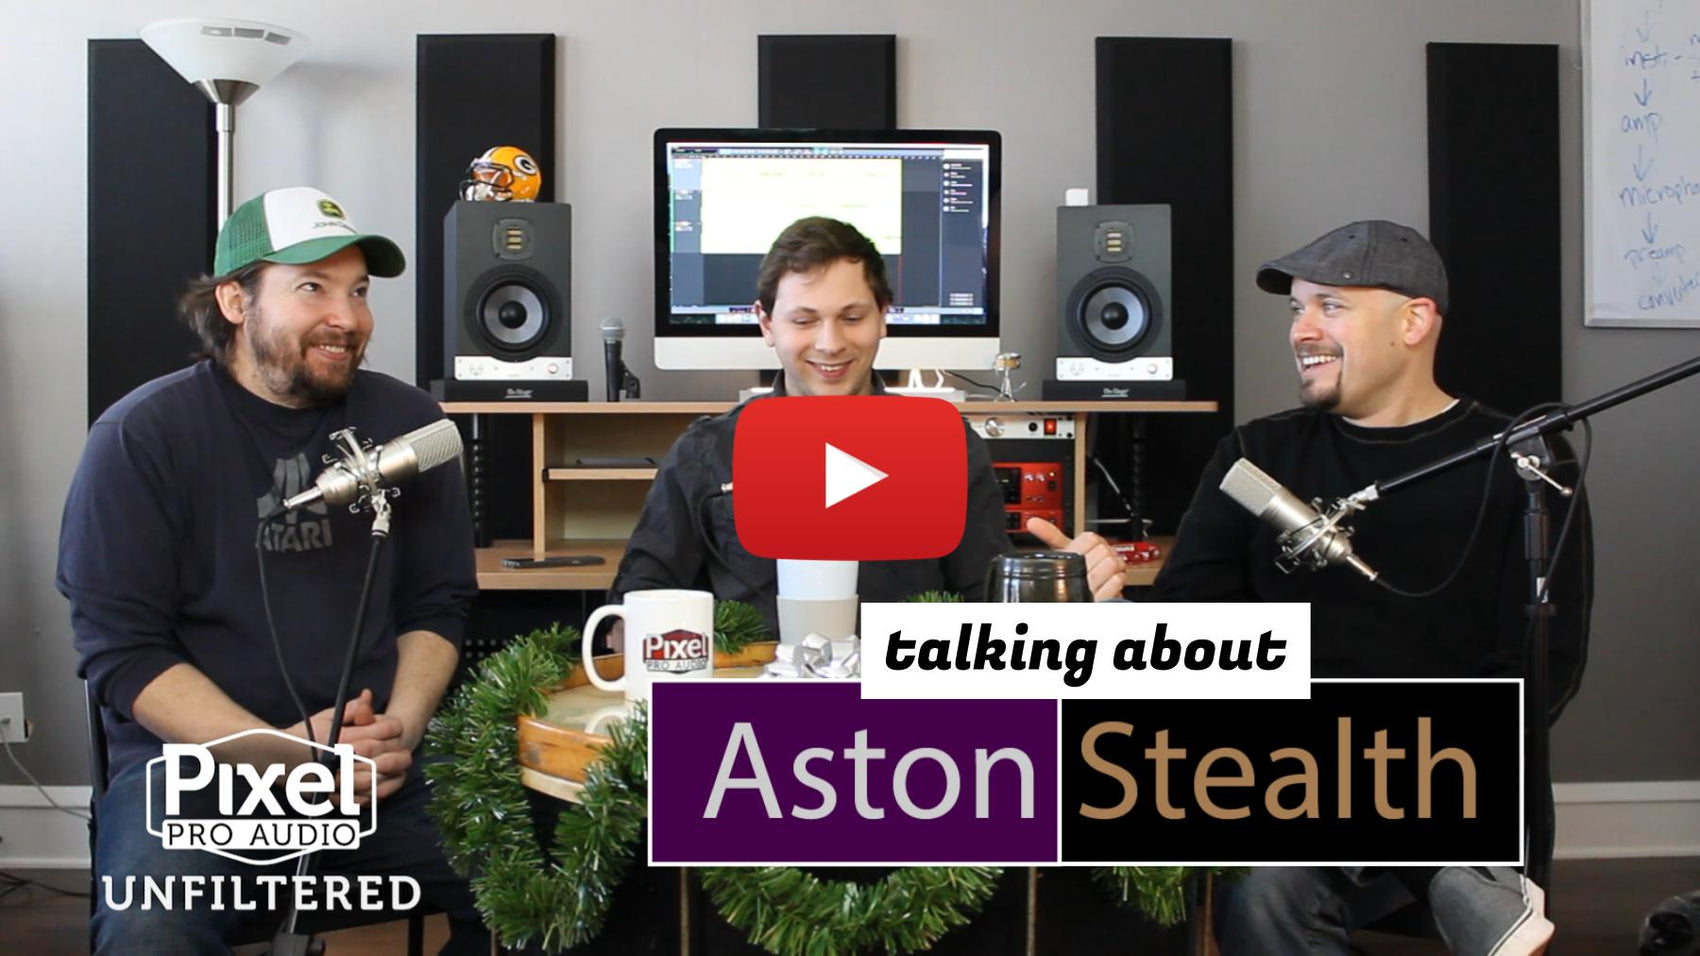 Weekly Show - Pixel Pro Audio: Unfiltered - Our Take on the Aston Stealth